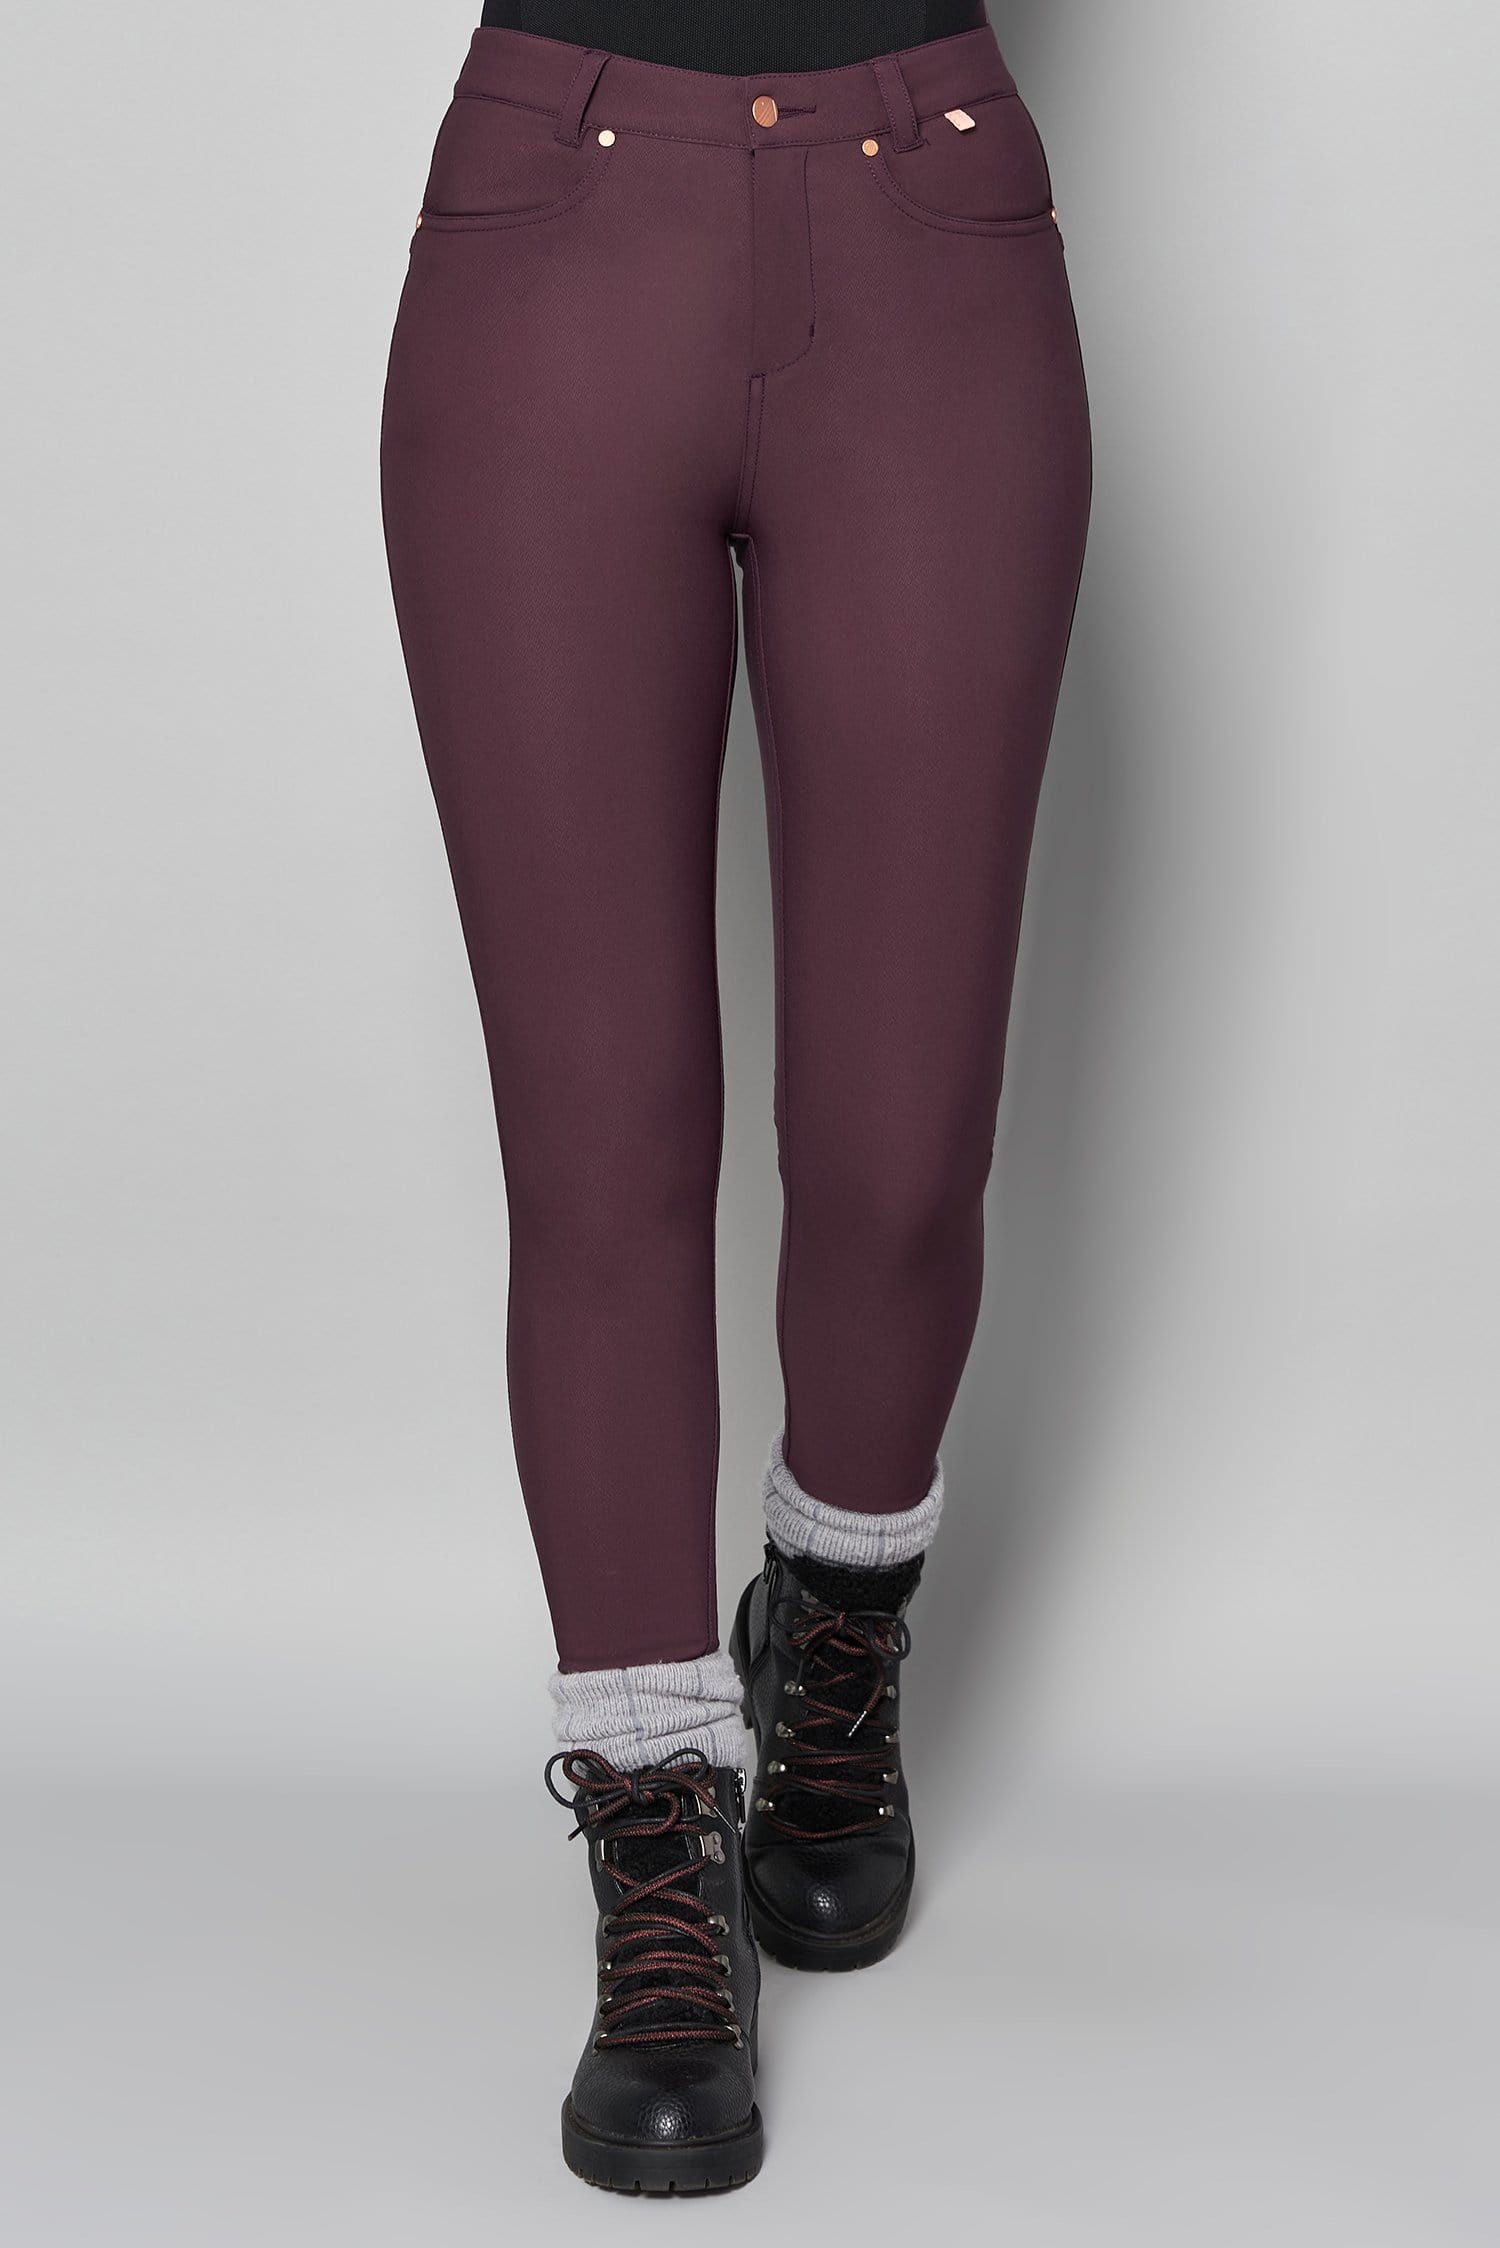 Thermal Skinny Outdoor Trousers - Aubergine - 26p / Uk8 - Womens - Acai Outdoorwear